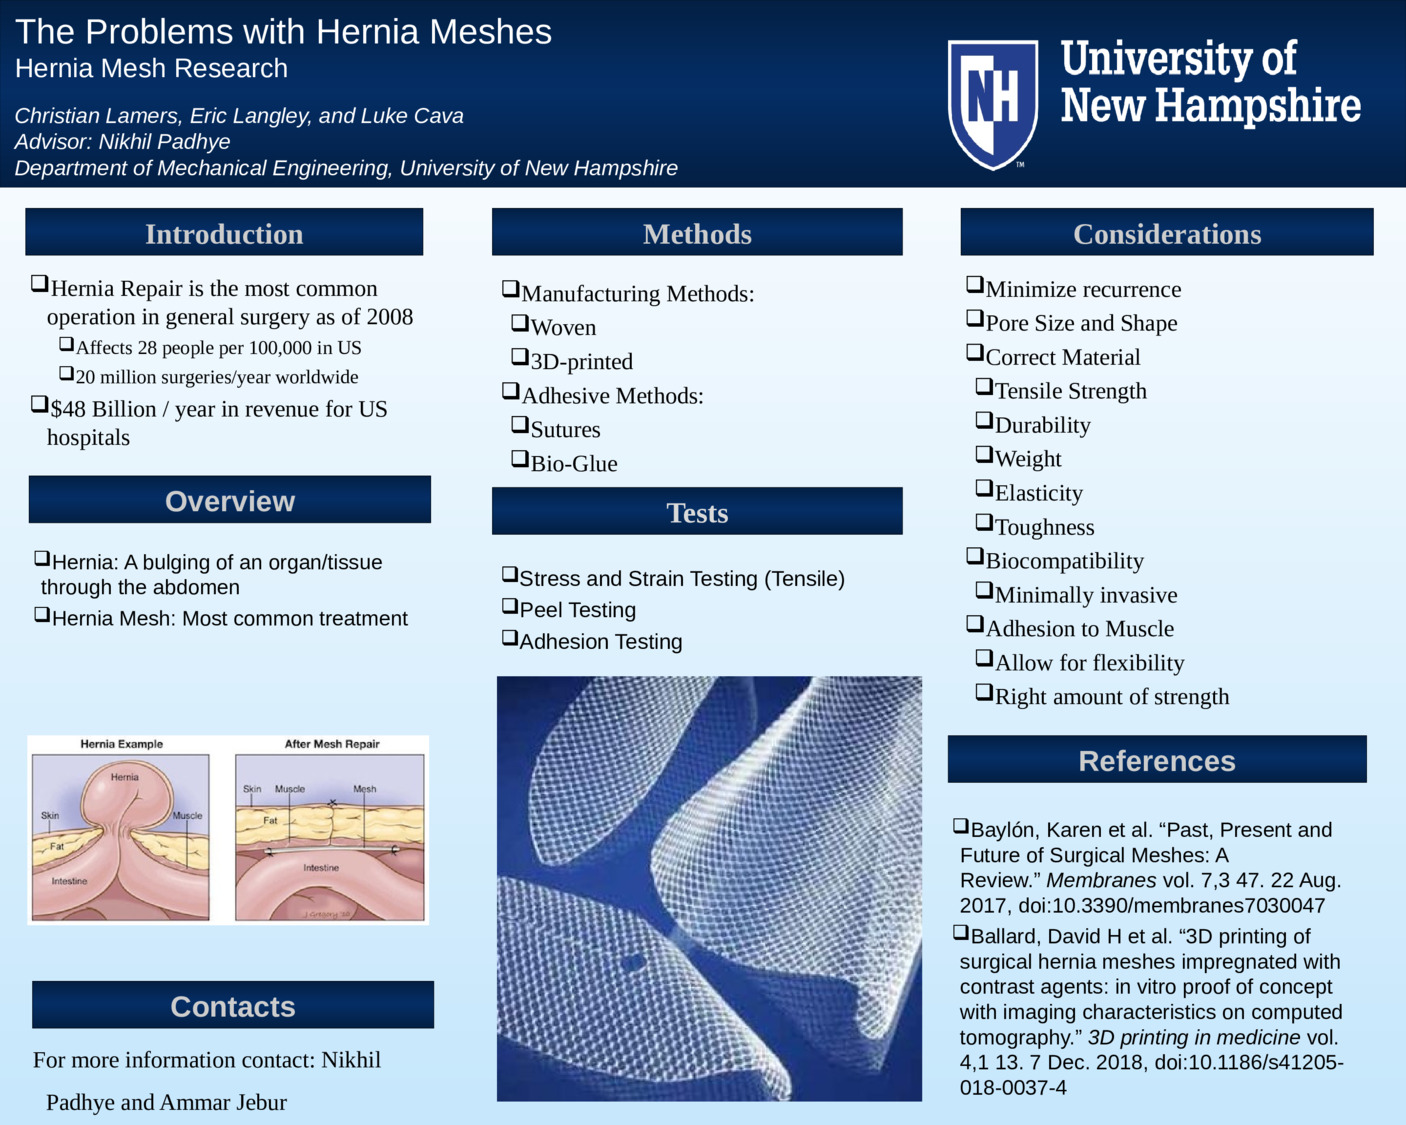 The Problems With Hernia Meshes by cjl1070